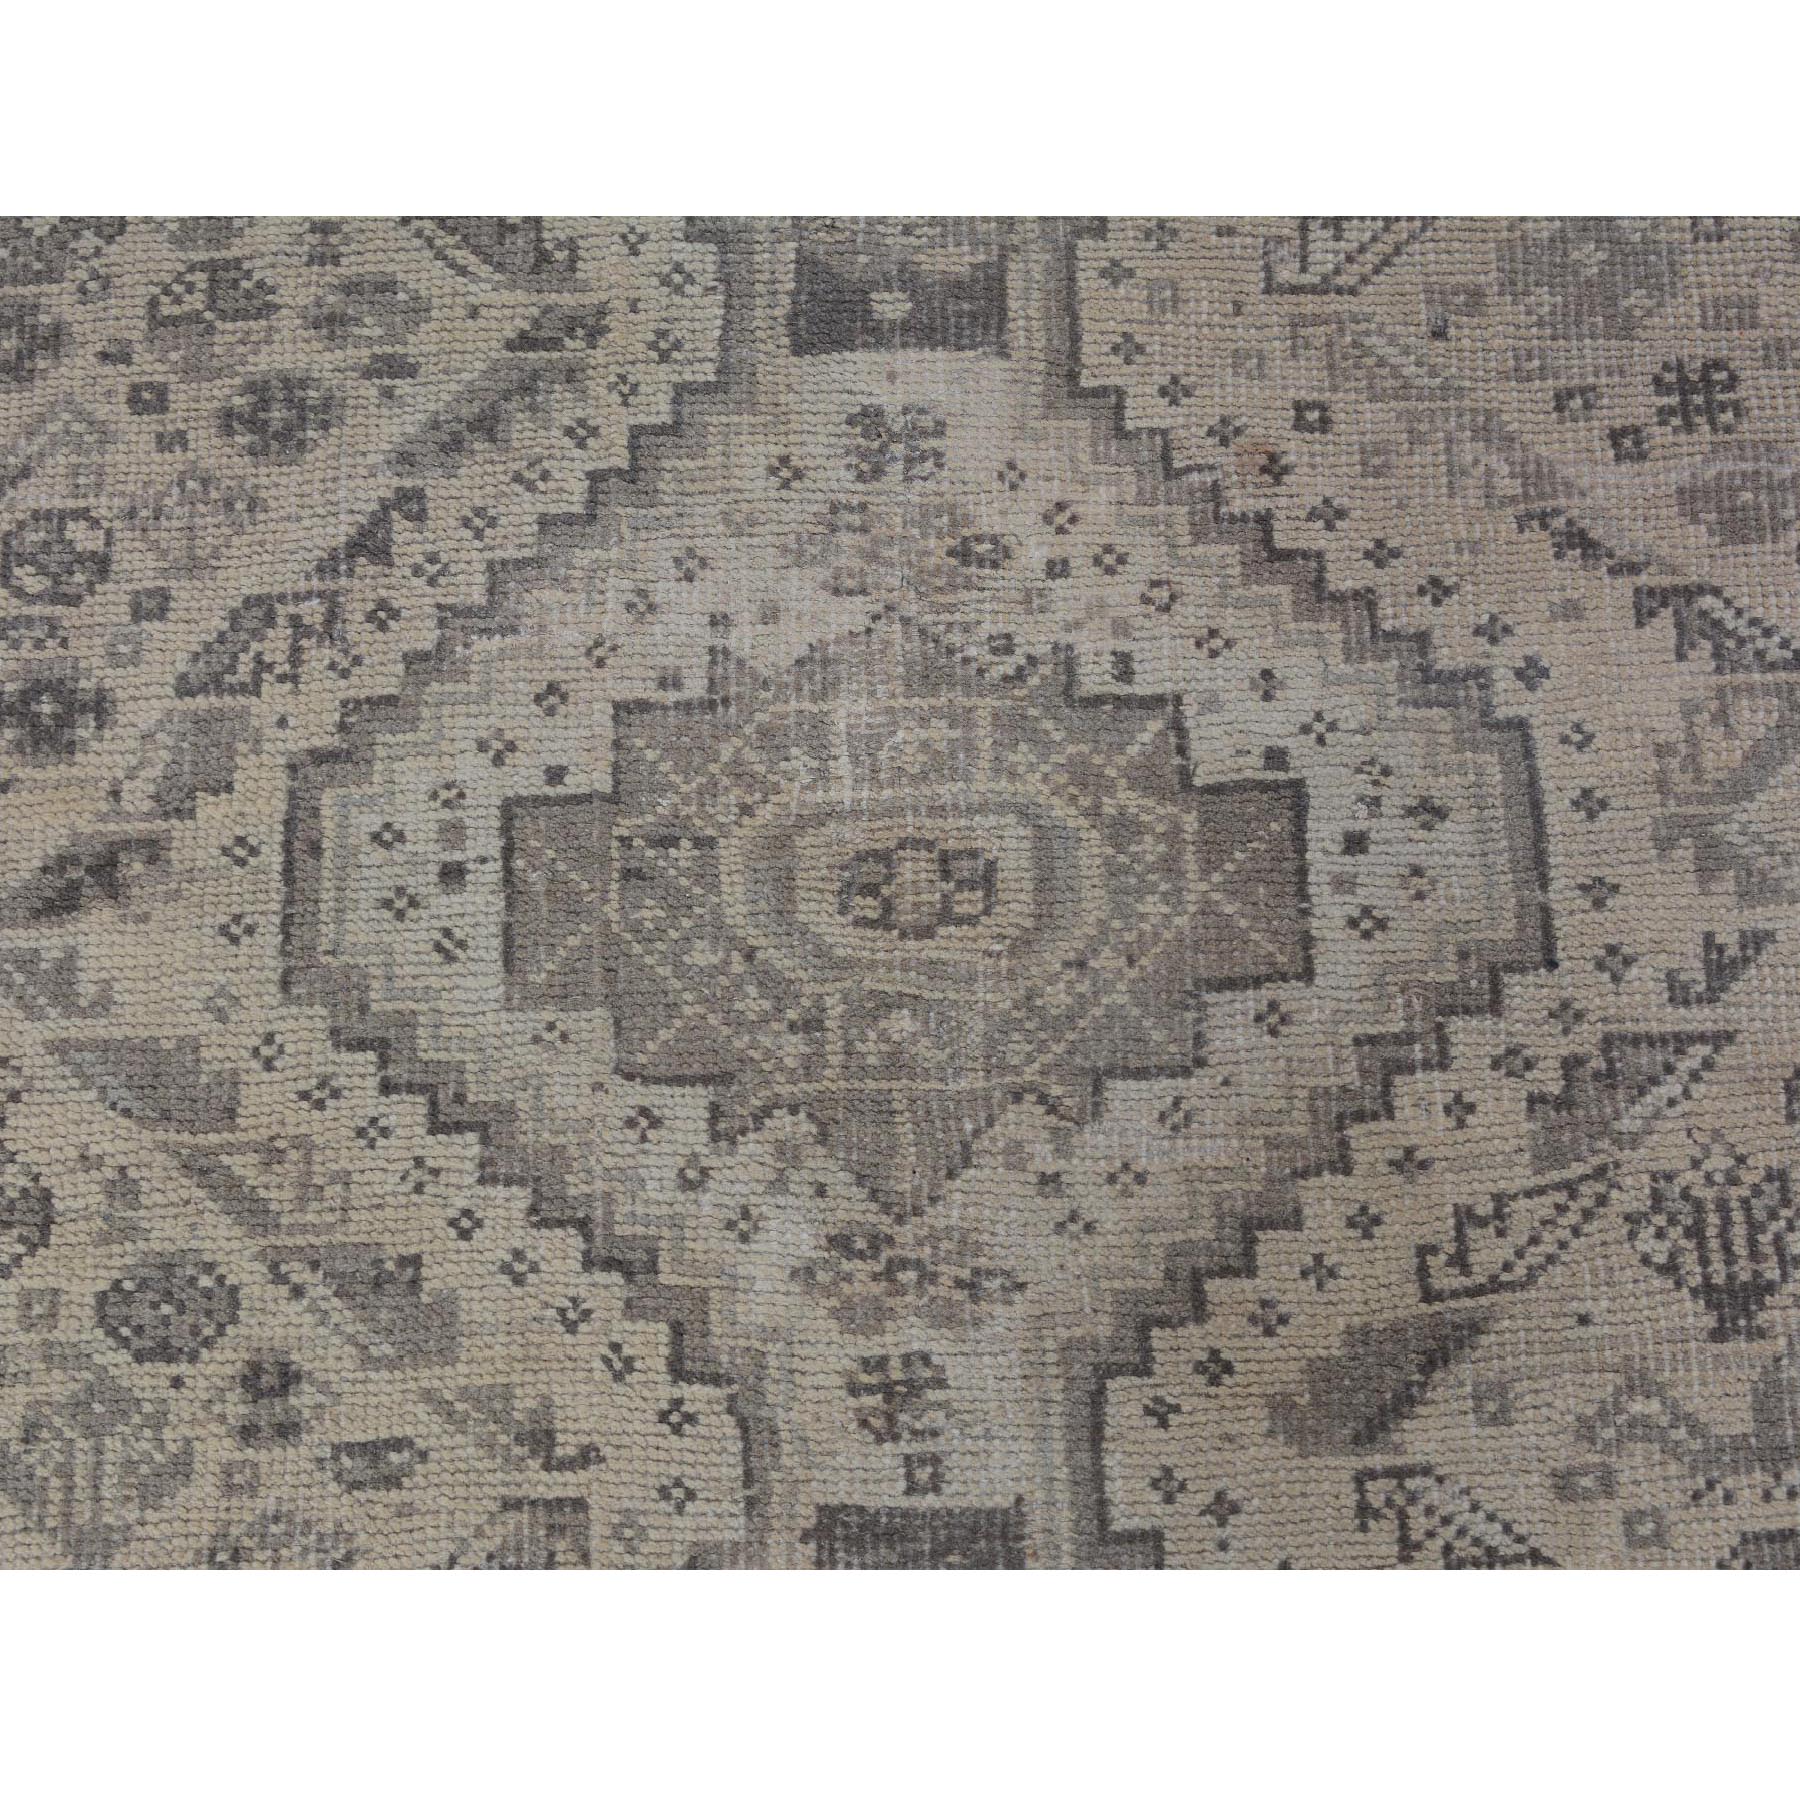 6-10 x10- Distressed Colors Vintage Persian Shiraz Worn Down Pure Wool Hand Knotted Oriental Rug 